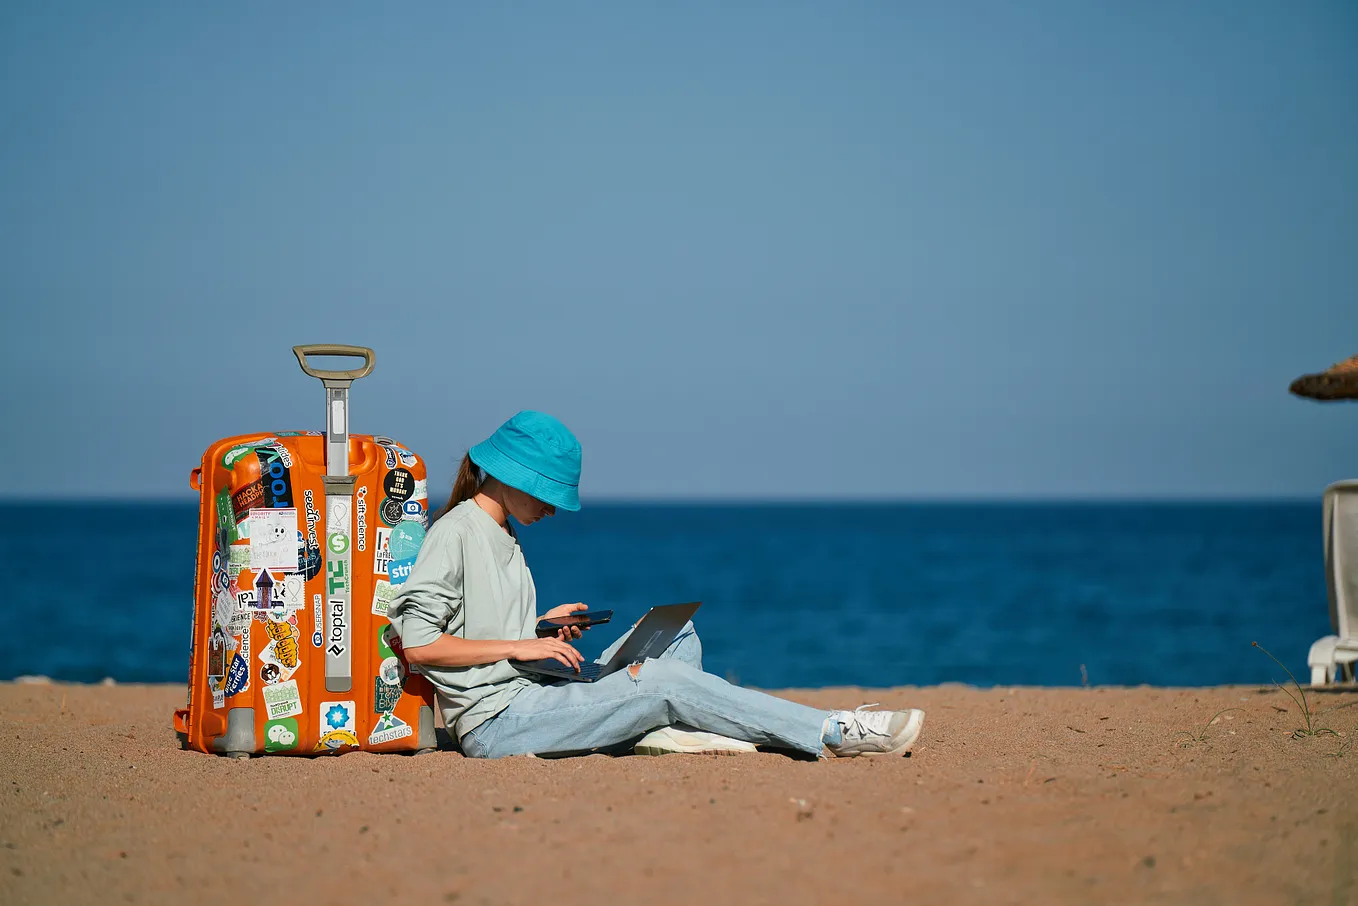 A girl by the beach with a suitcase and laptop.